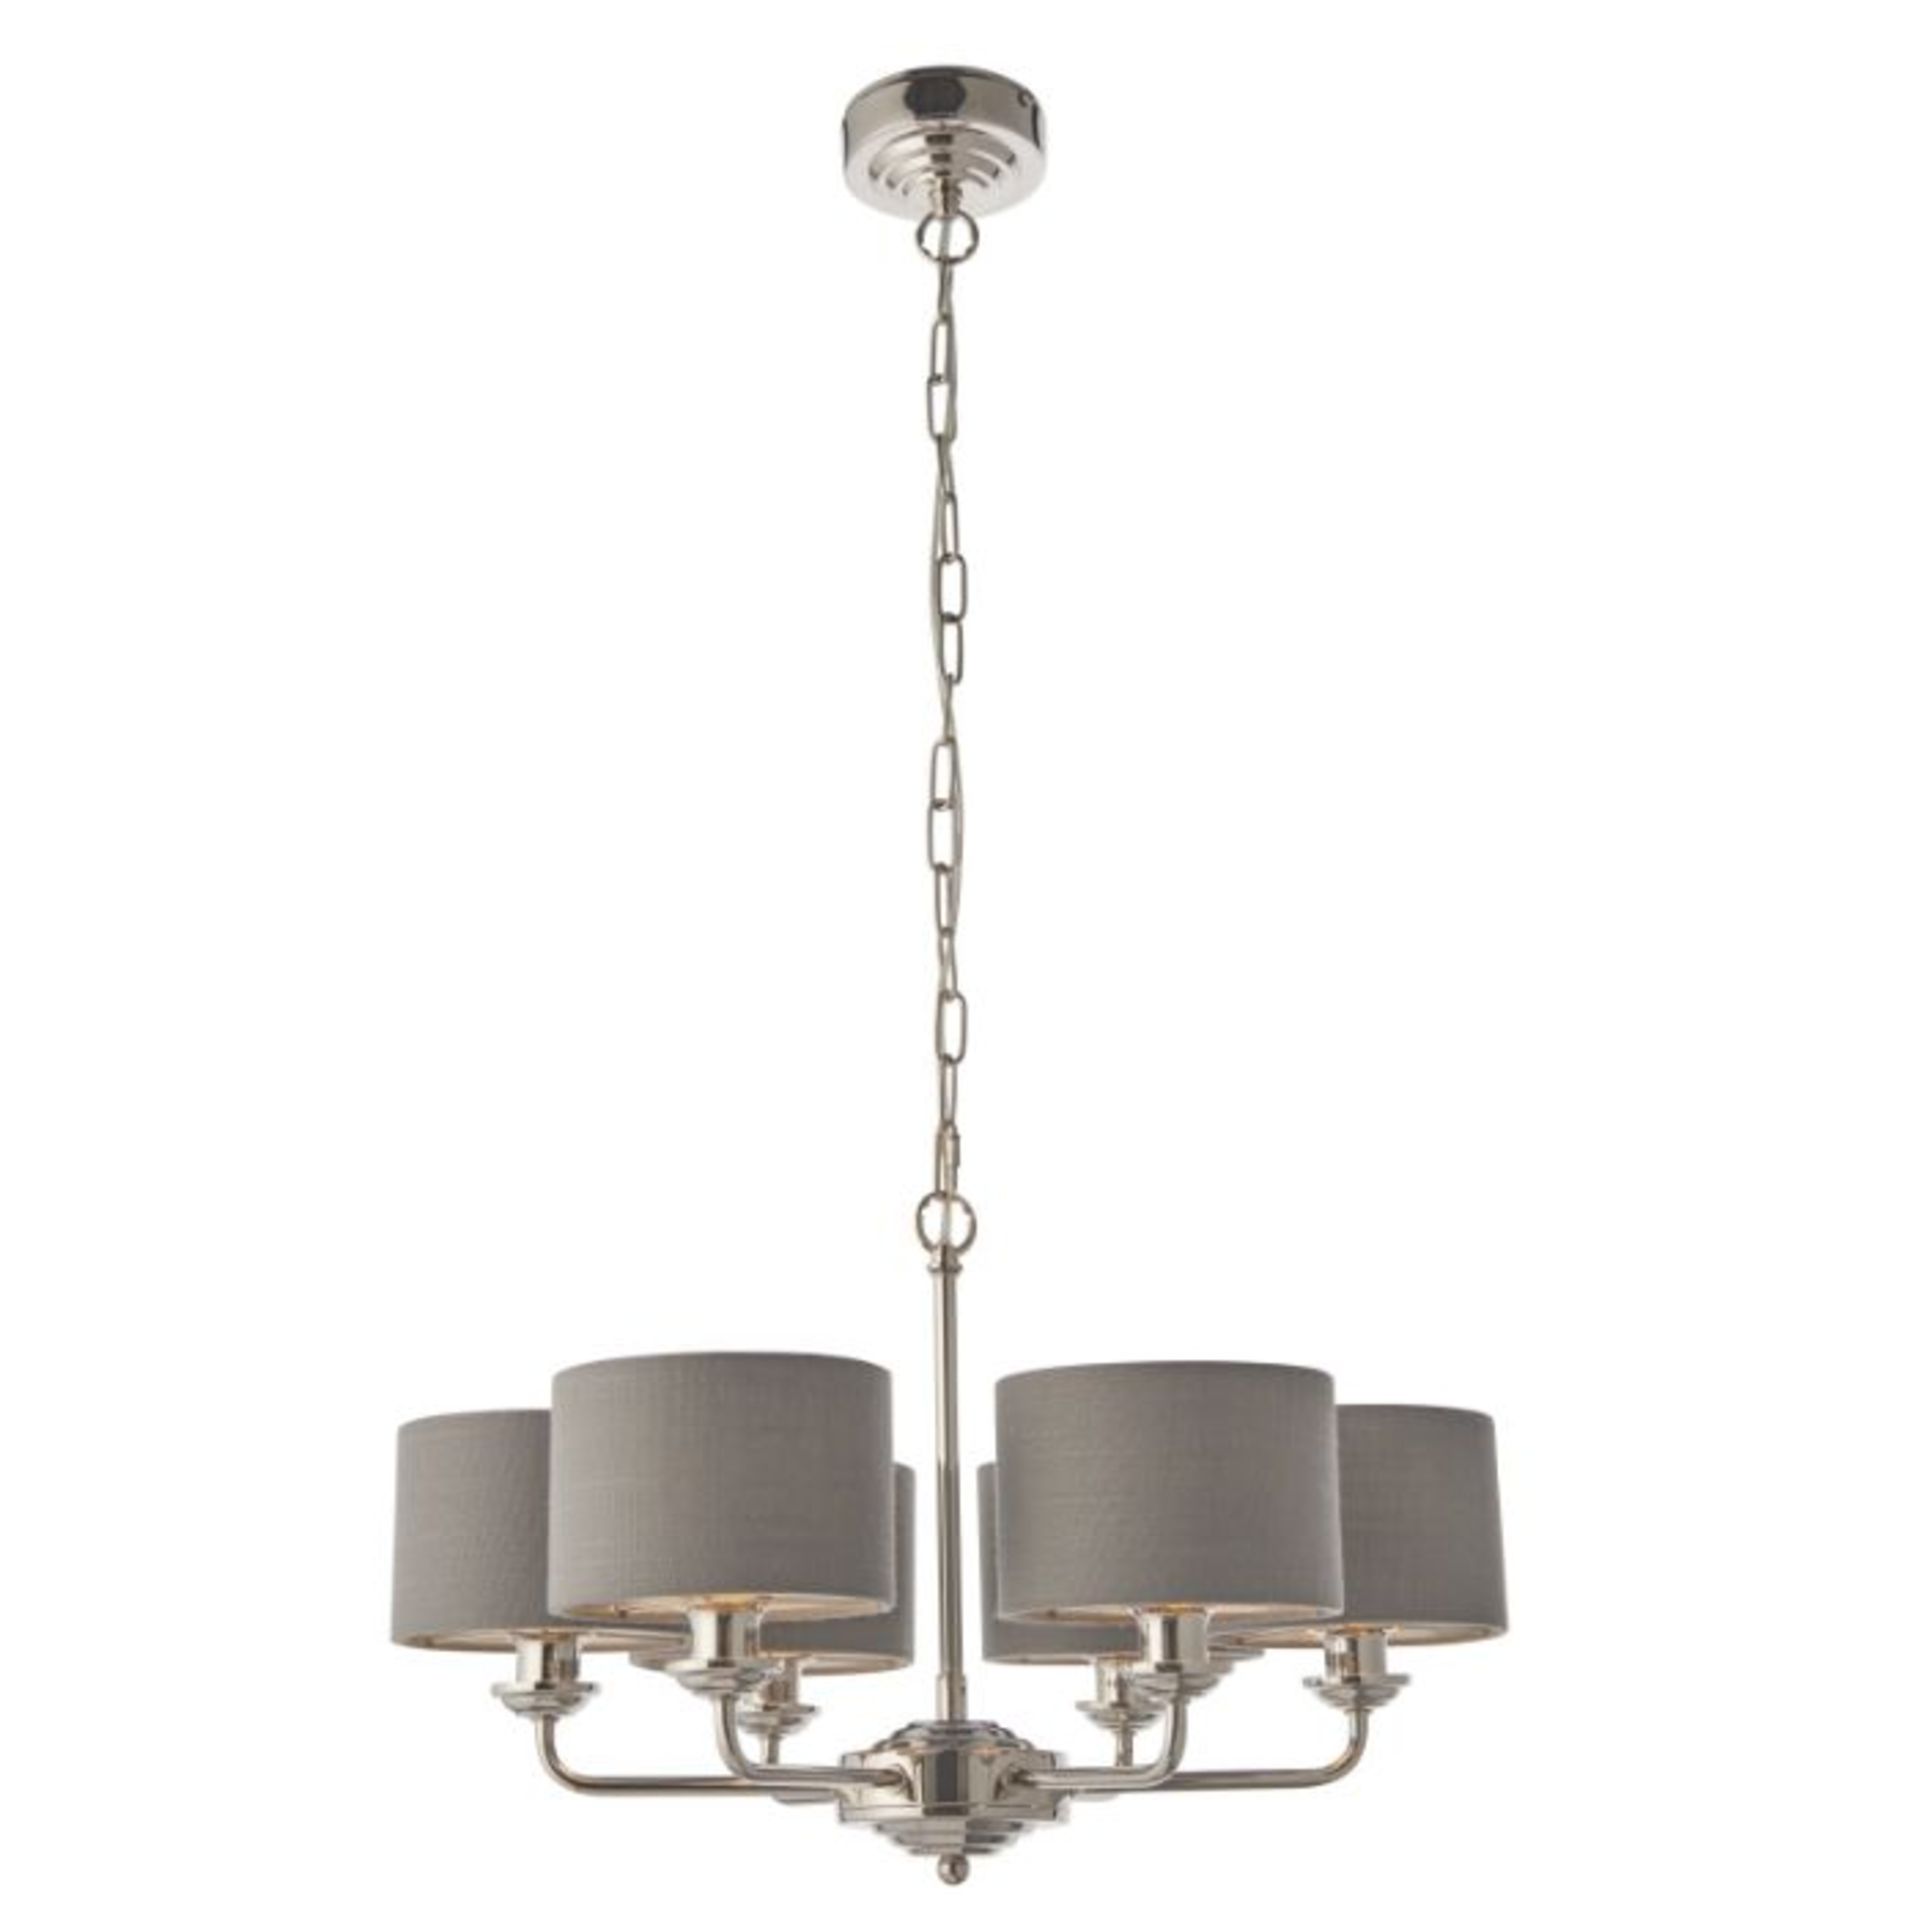 Three Posts, Abbigail 6-Light Shaded Chandelier (BRIGHT NICKEL & CHARCOAL) - RRP £141.99 (UEL11133 -